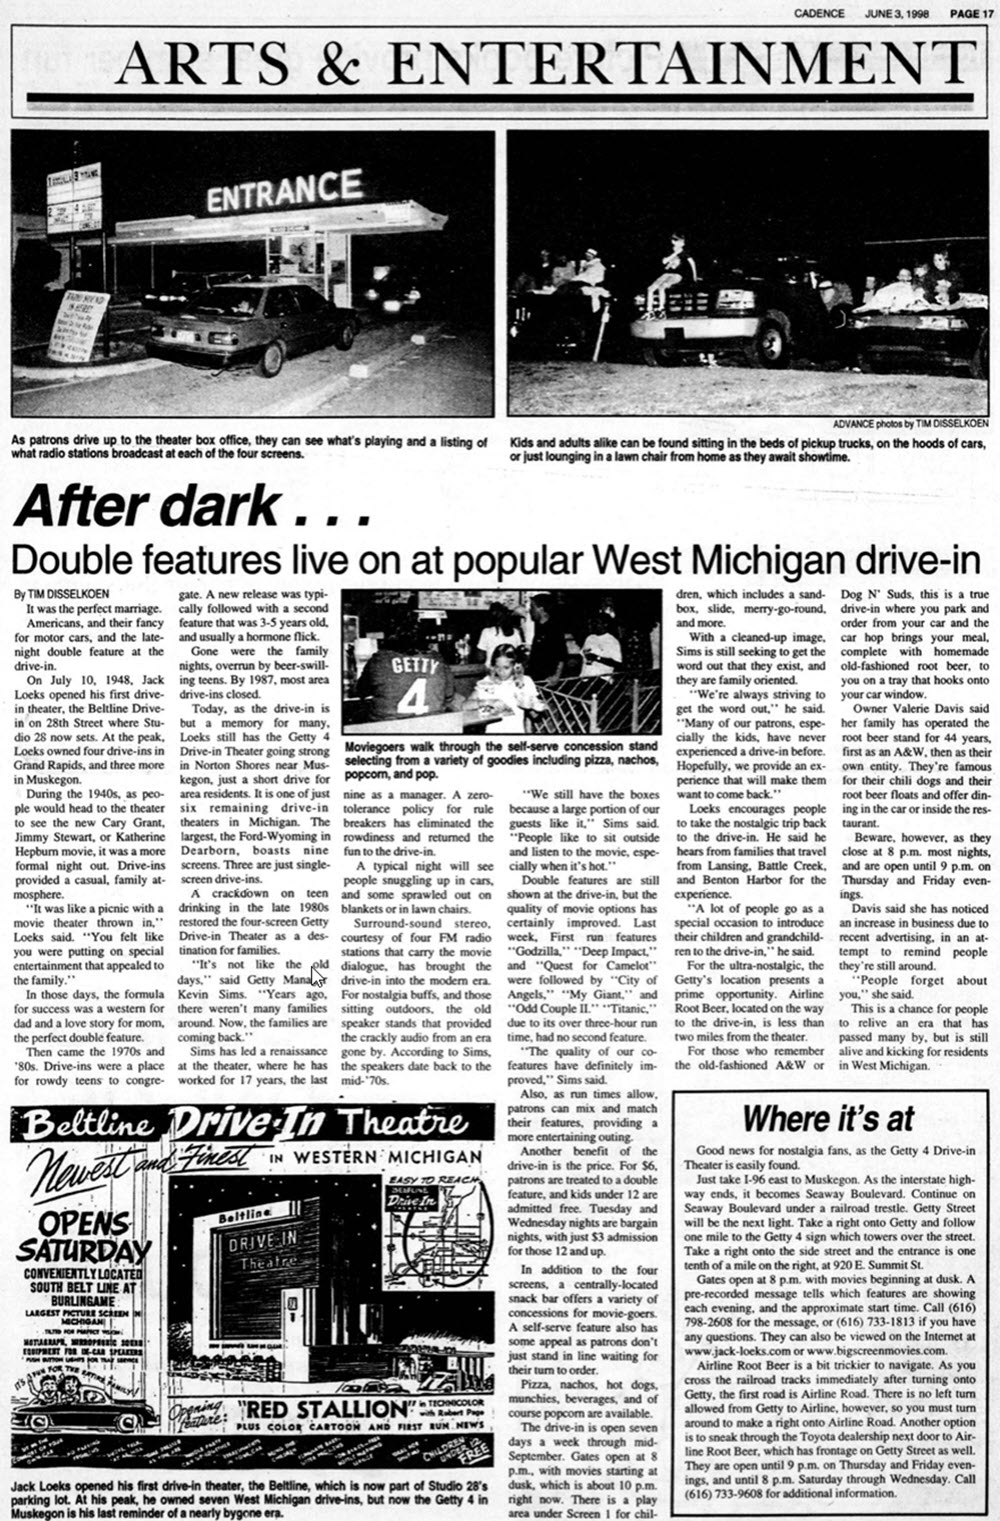 Getty 4 Drive-In Theatre - June 1998 Article (newer photo)